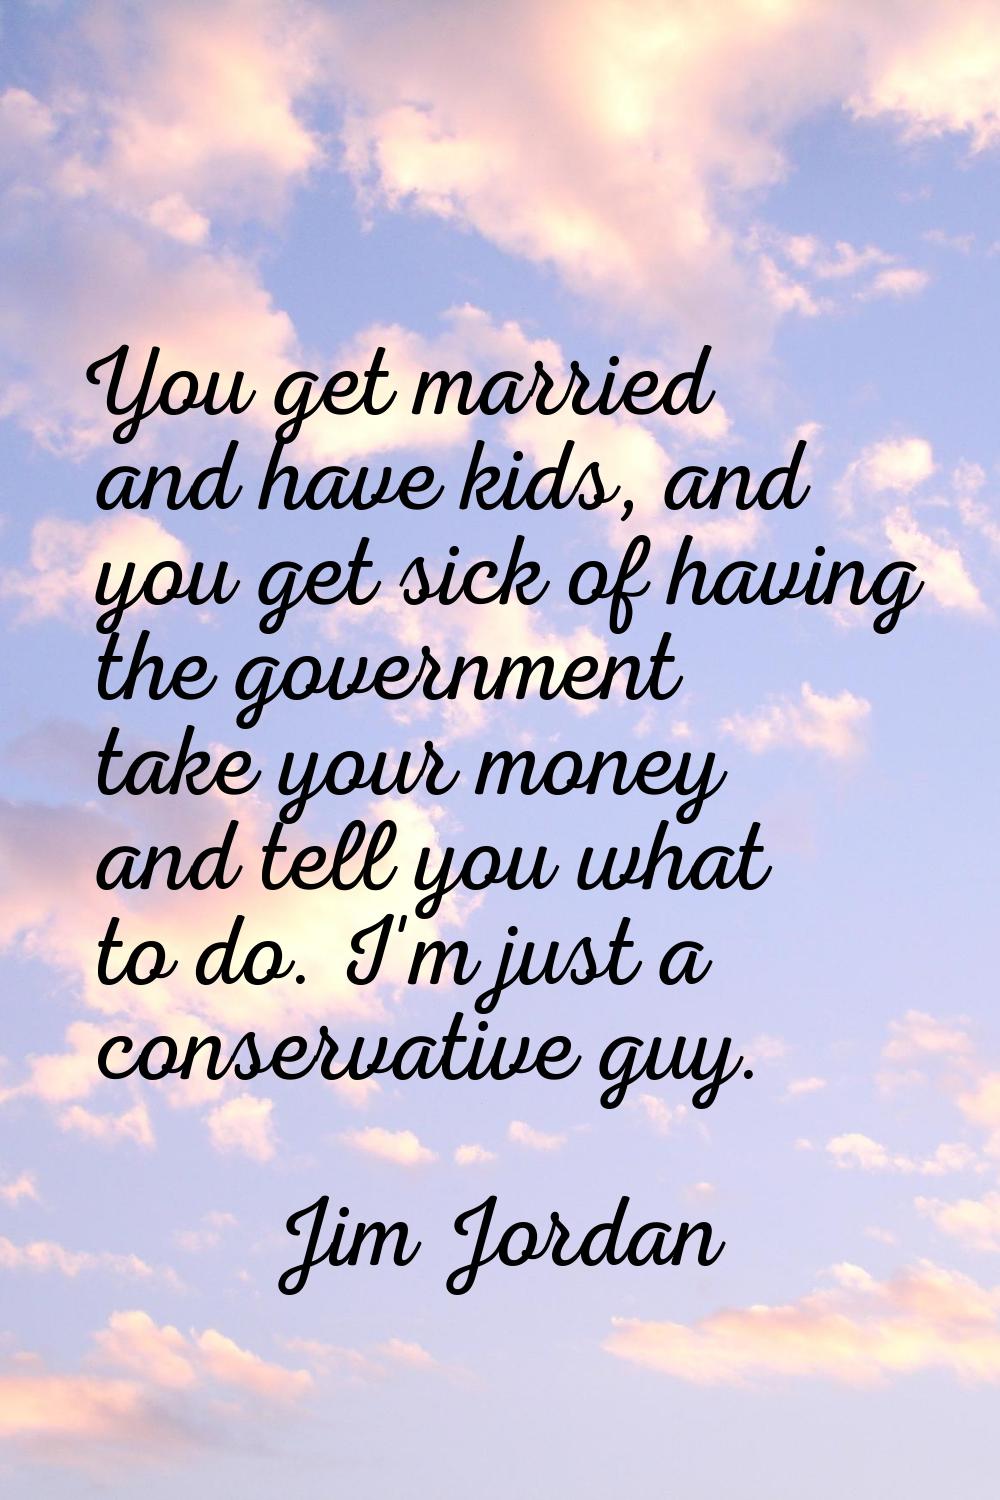 You get married and have kids, and you get sick of having the government take your money and tell y